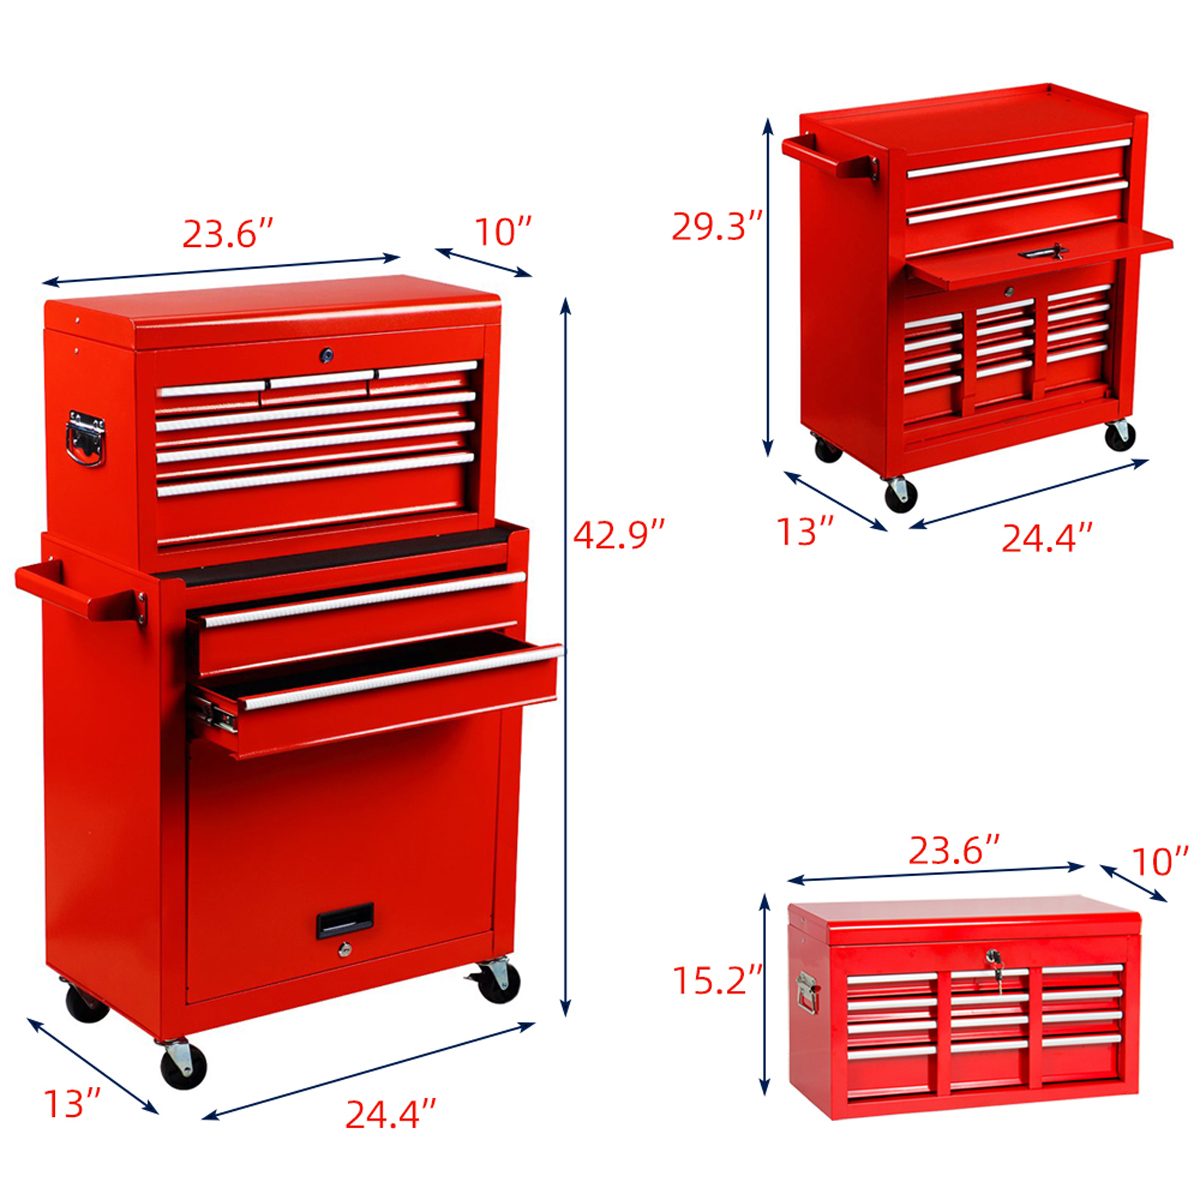 Odaof 8 Drawer Mechanic Tool Chest with Wheels Heavy Duty Rolling Tool Box Cabinet with Riser Sliding Drawers Keyed Locking System Top Detachable Toolbox Organizer for Workshop Red - image 5 of 9